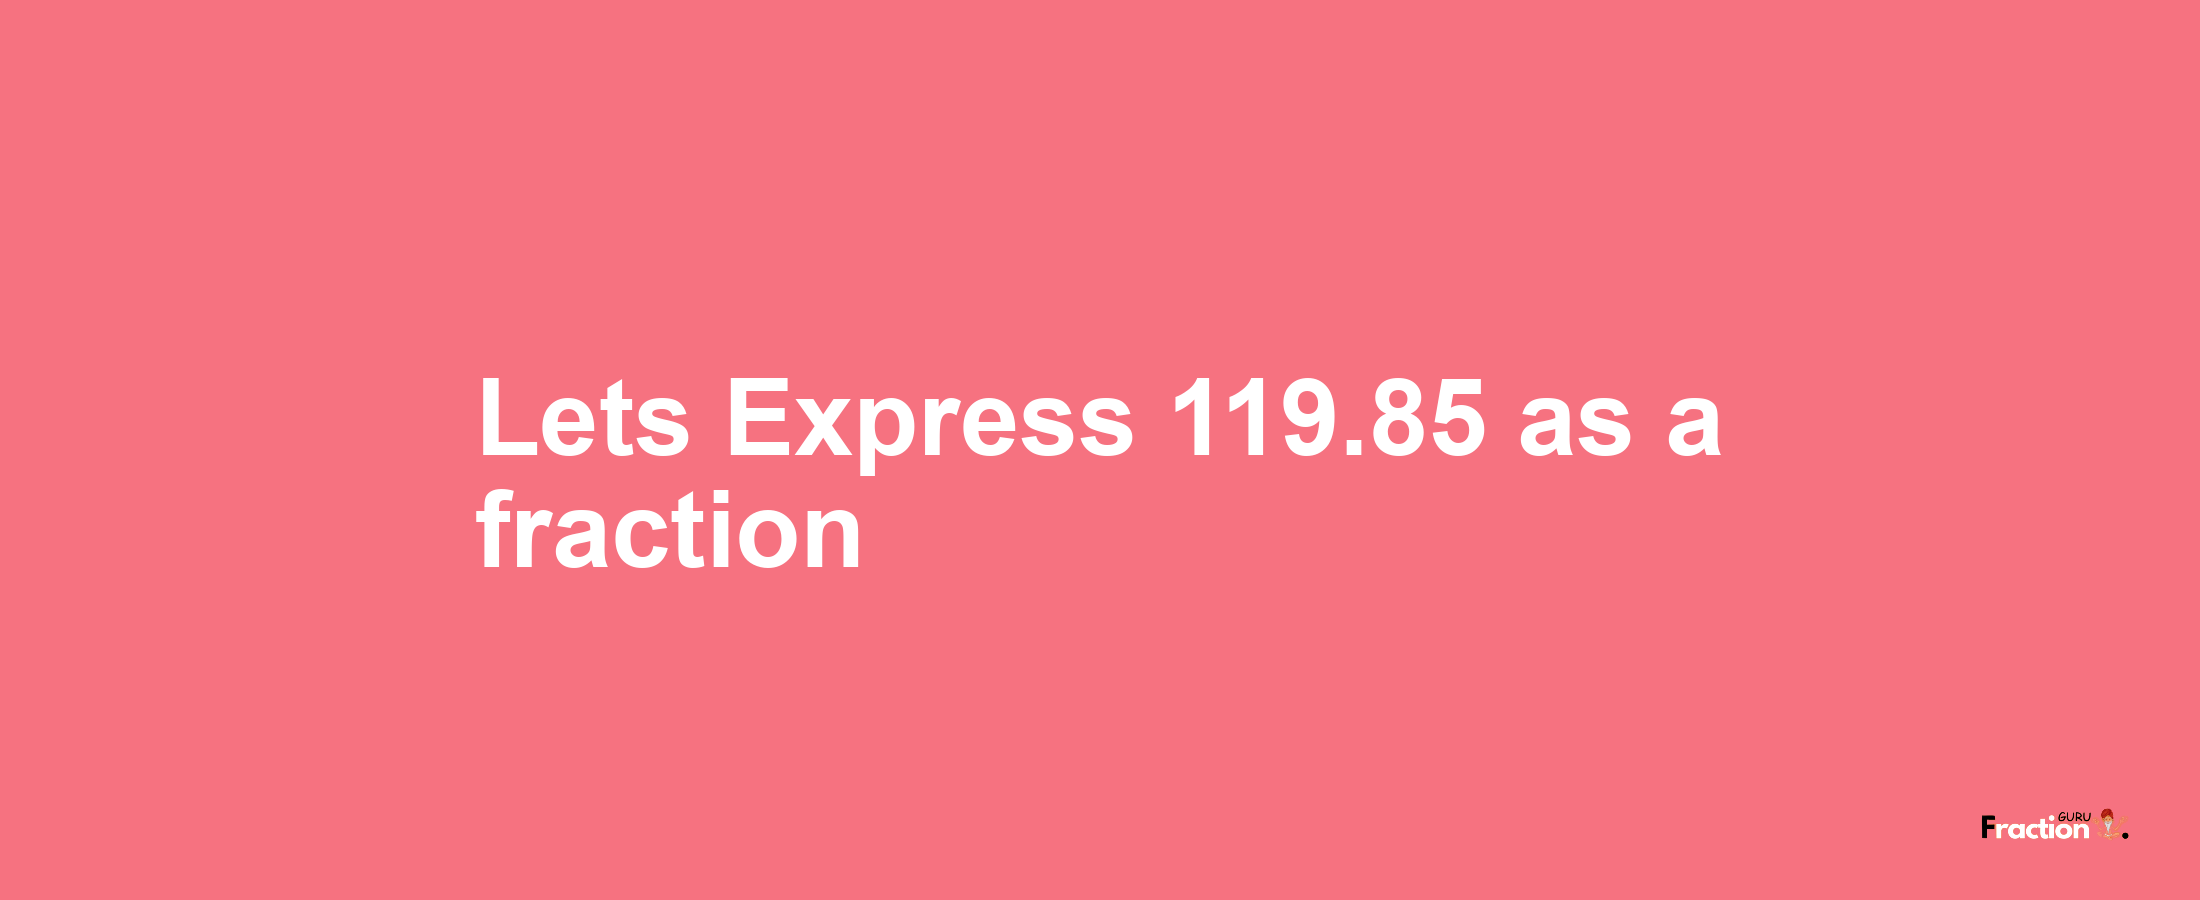 Lets Express 119.85 as afraction